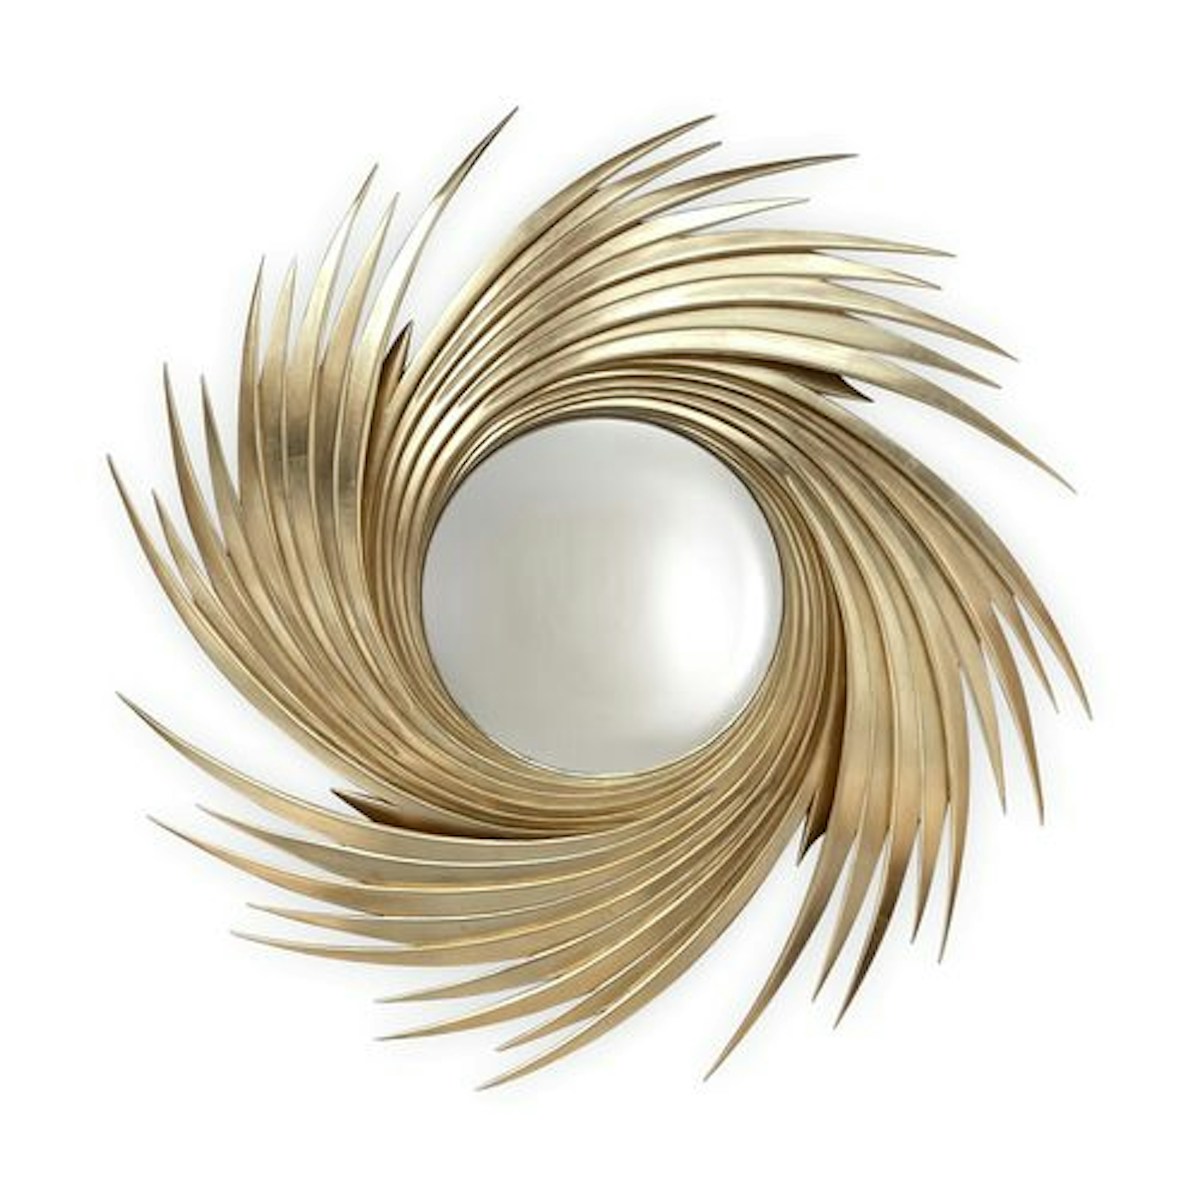 Camilla Mirror - 9 Best Statement Wall Mirrors To Hang In Your Home - LuxDeco.com